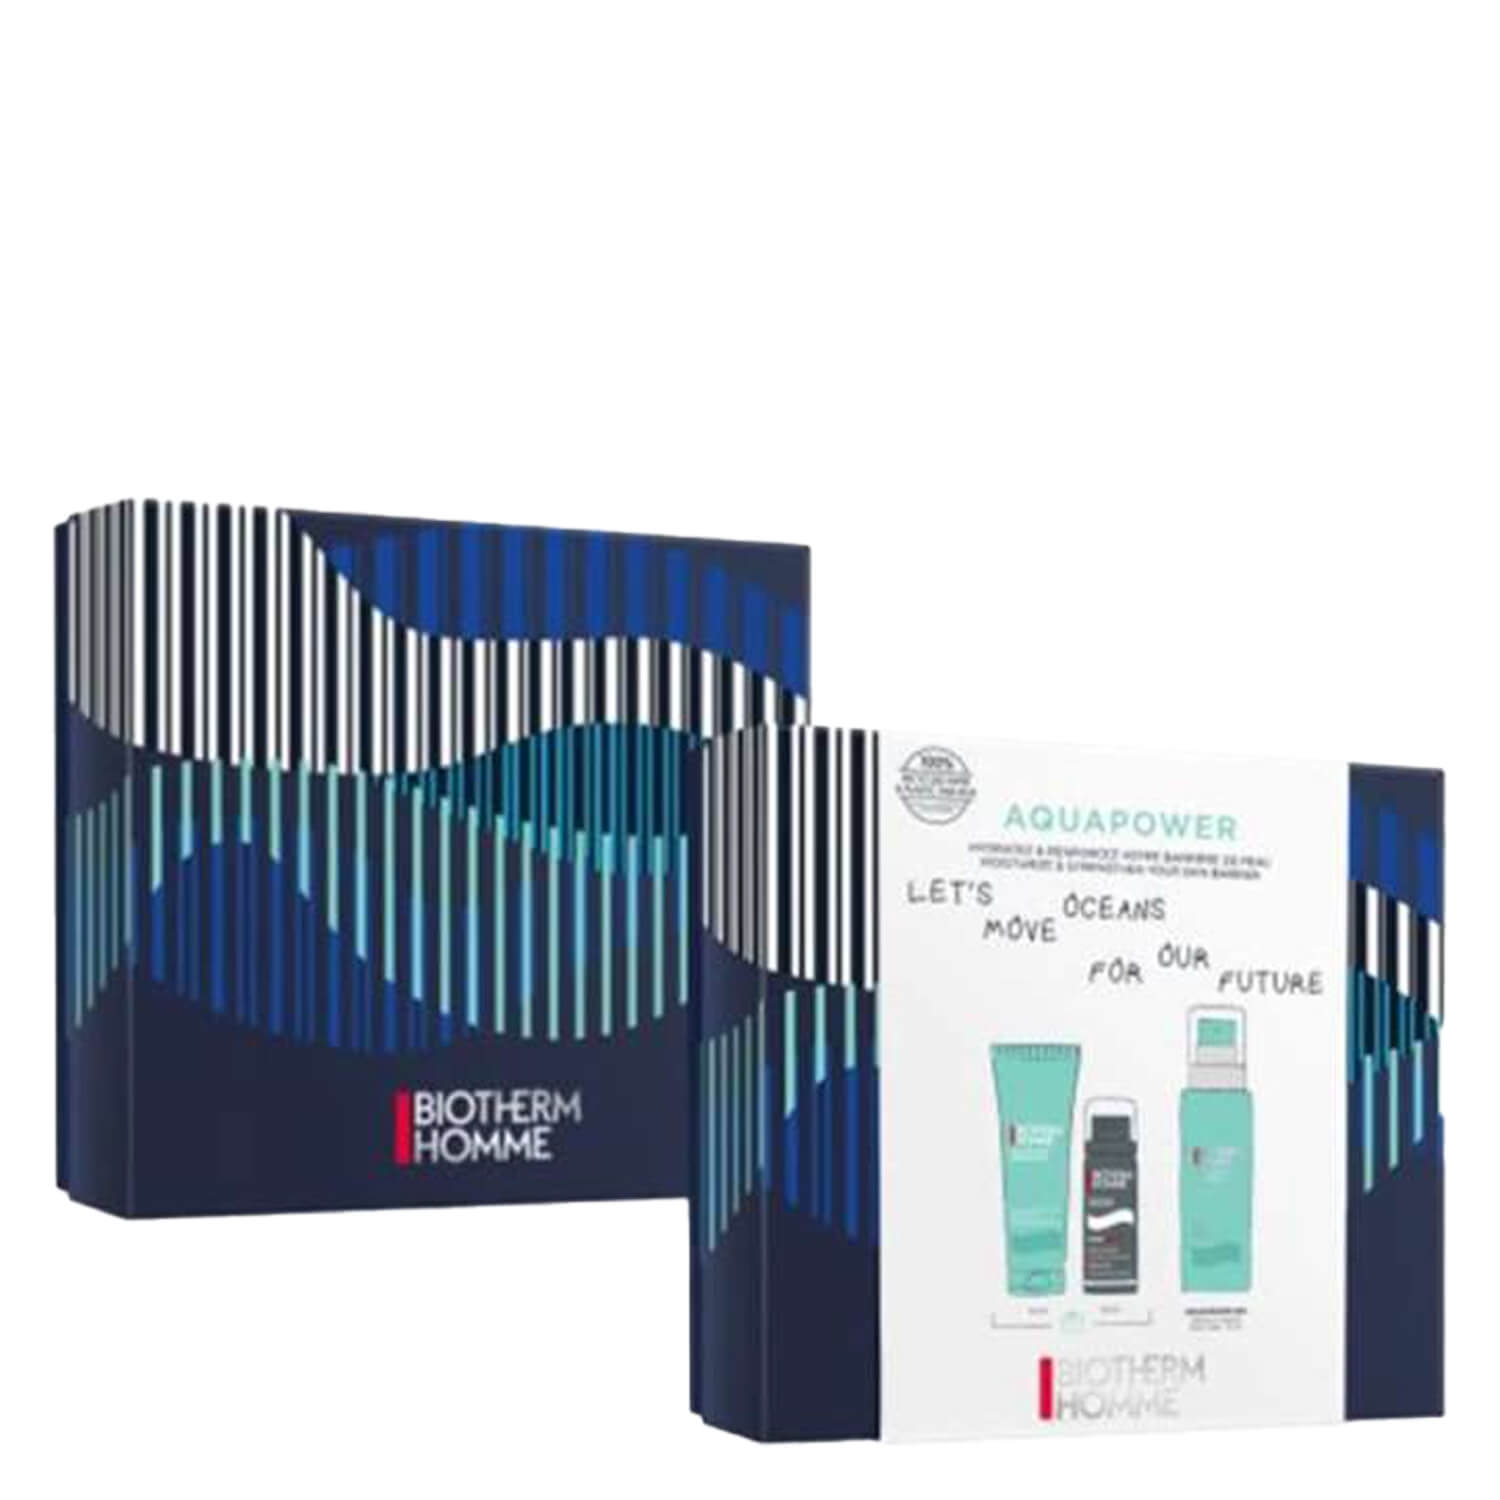 Product image from Biotherm Specials - Aquapower Future Set